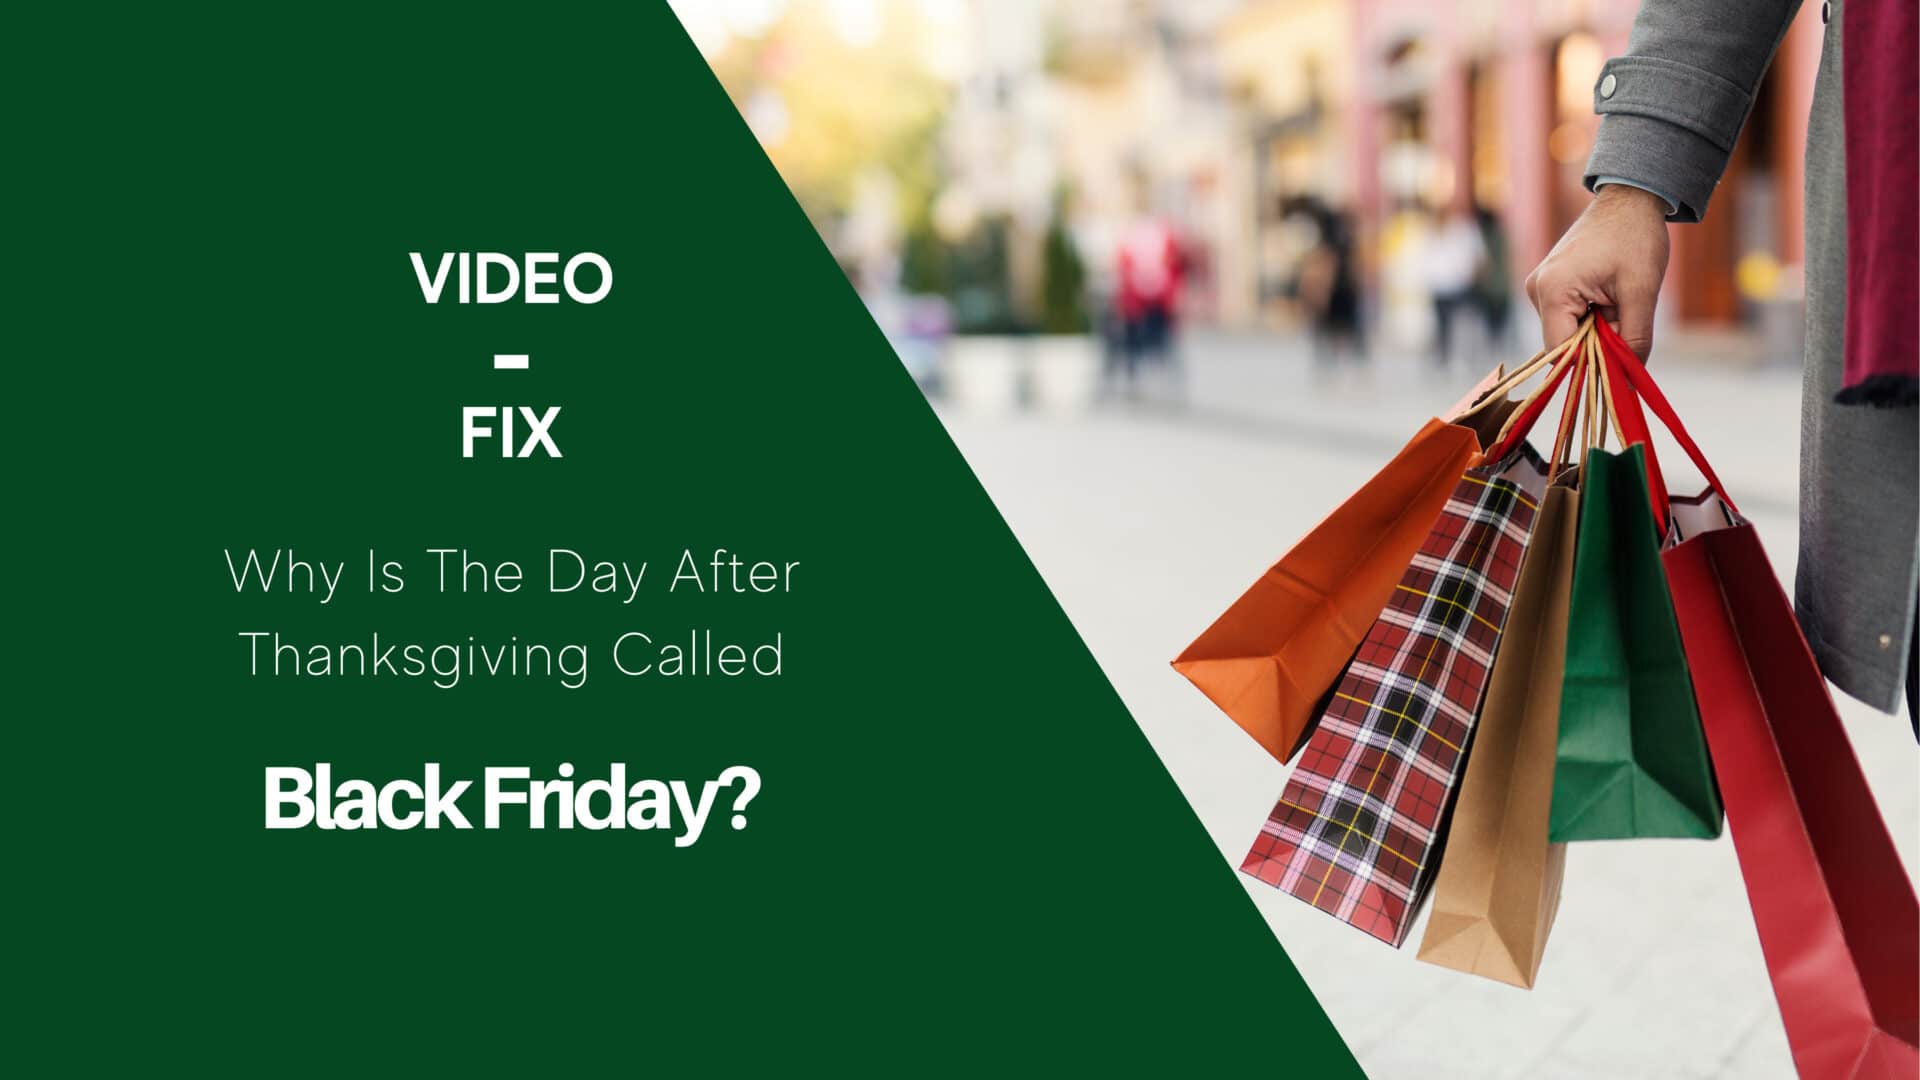 Video-Fix: Why Is The Day After Thanksgiving Called Black Friday - What Is The Sale Day After Black Friday Called